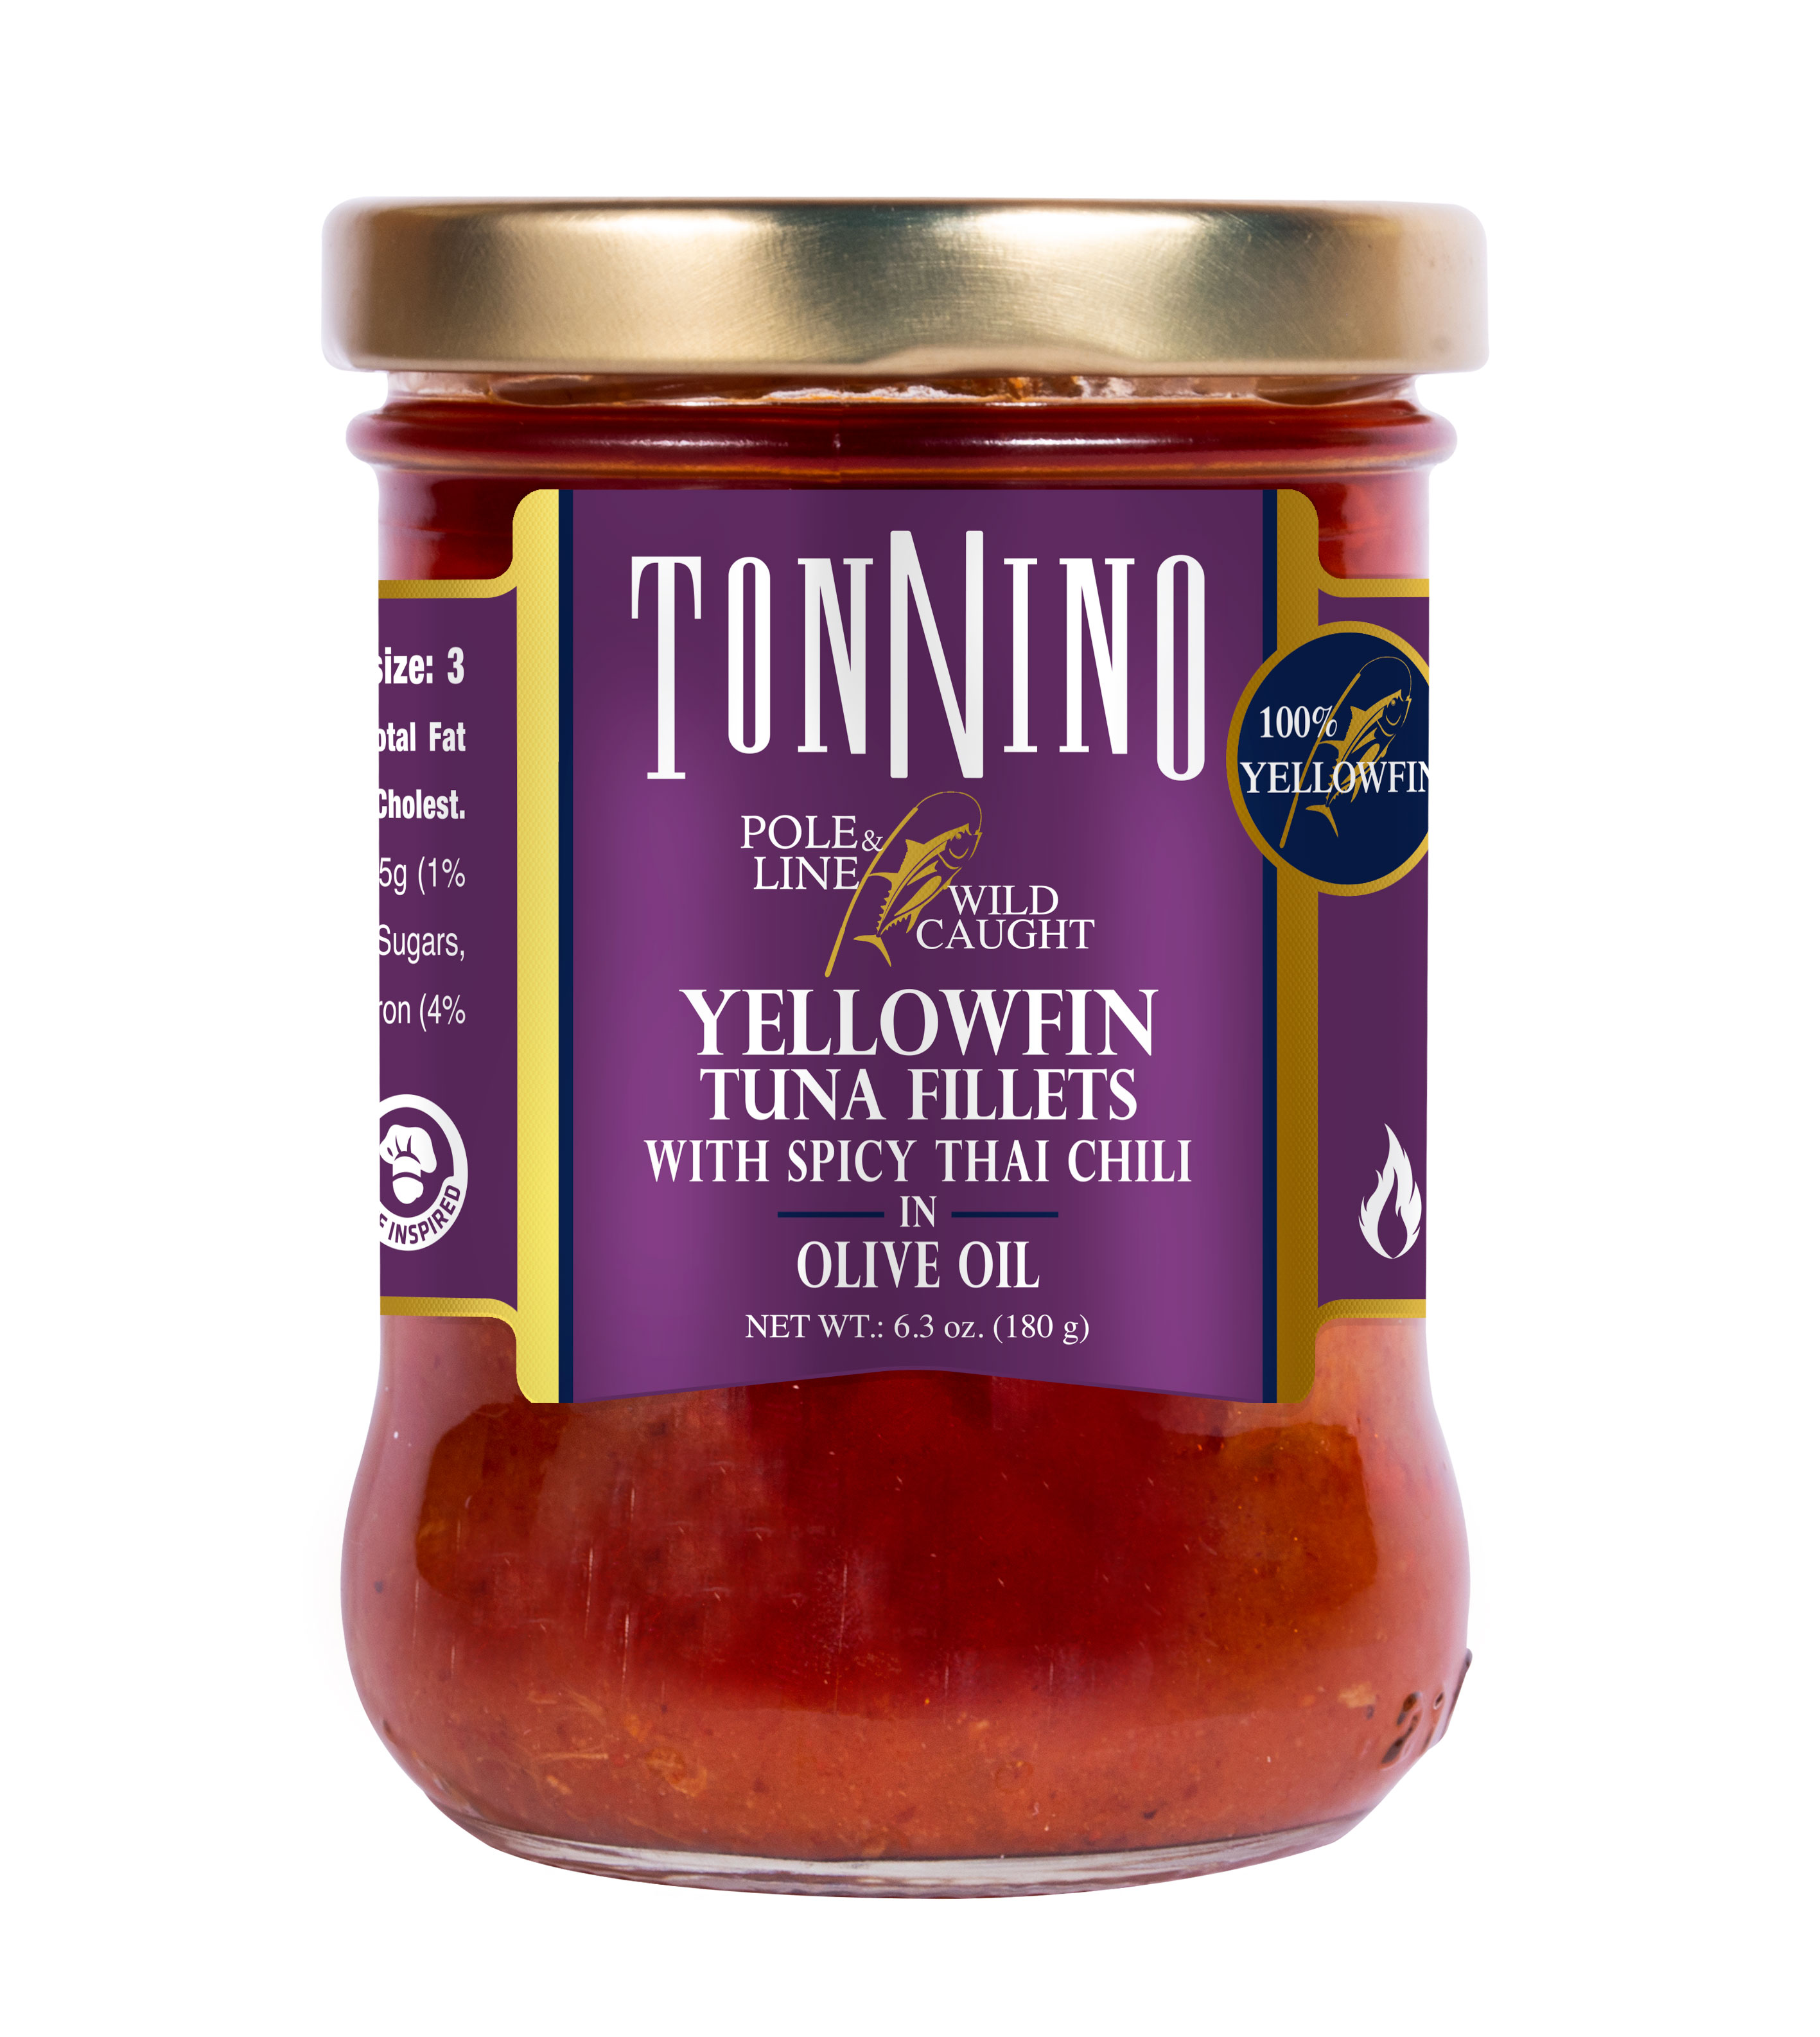 Tonnino Yellowfin Tuna Fillets With Spicy Thai Chili in Olive Oil, 6.3 oz